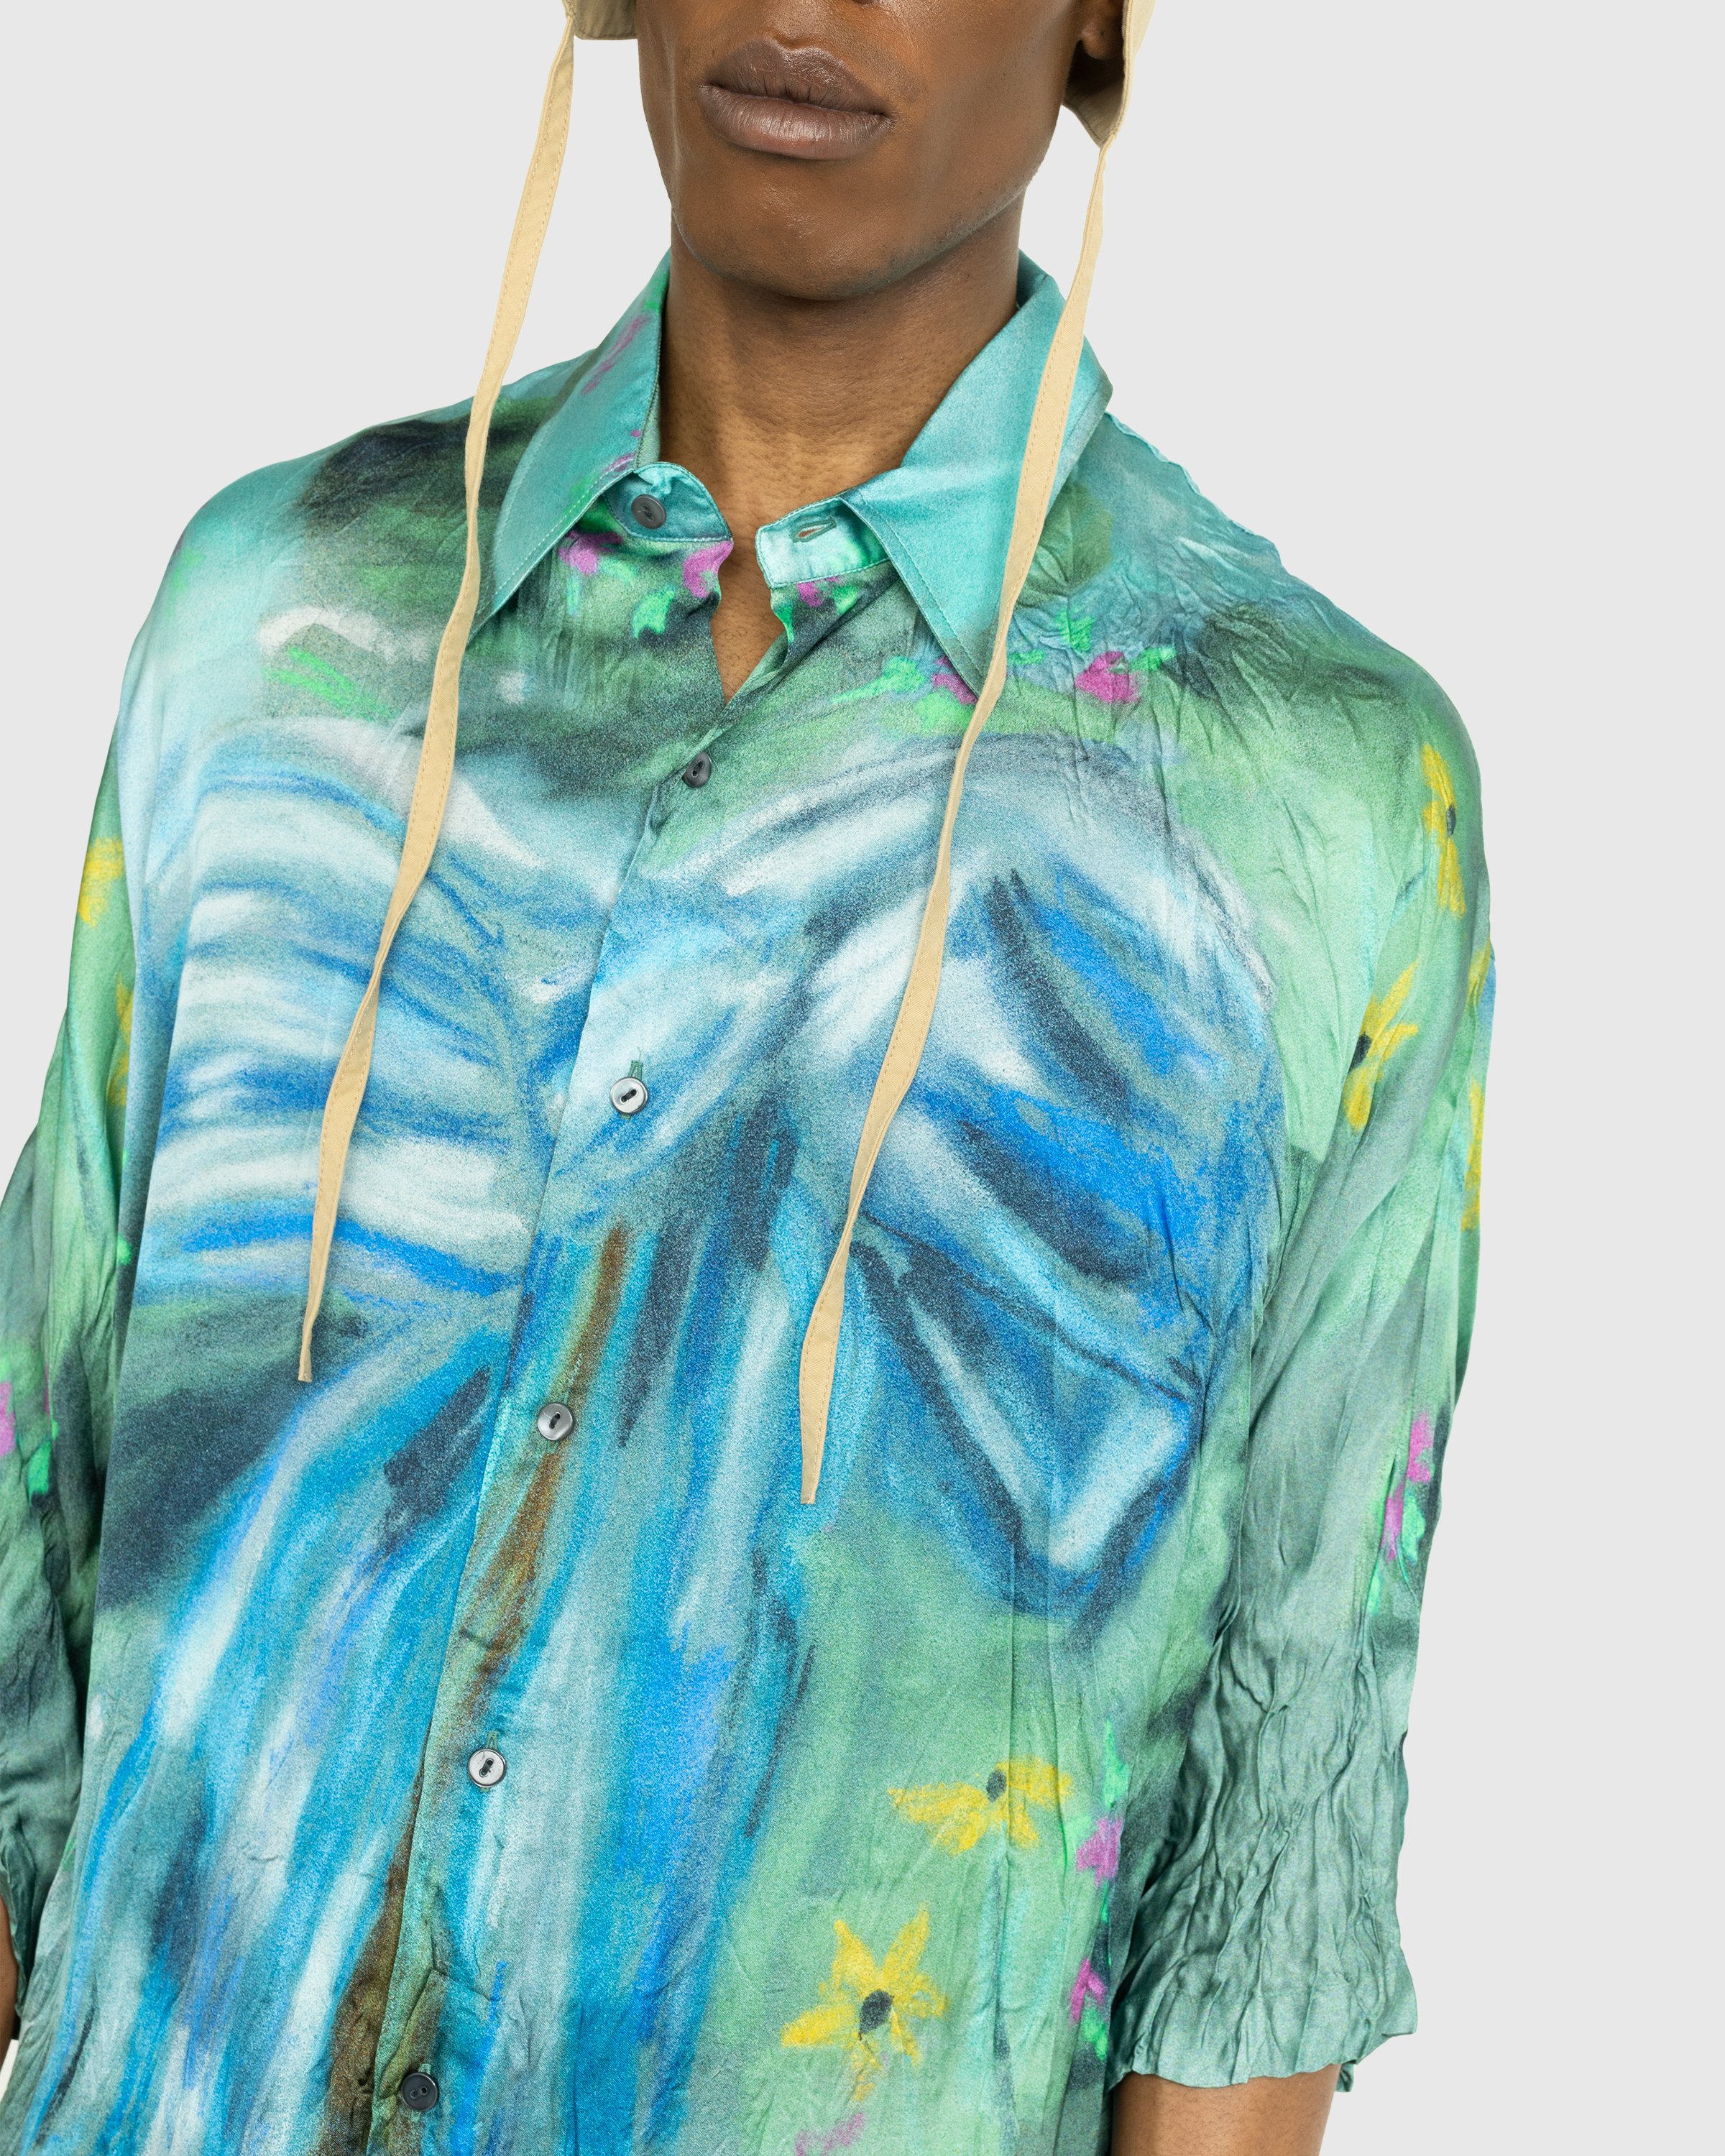 Acne Studios - Printed Button-Up Shirt Blue - Clothing - Blue - Image 4